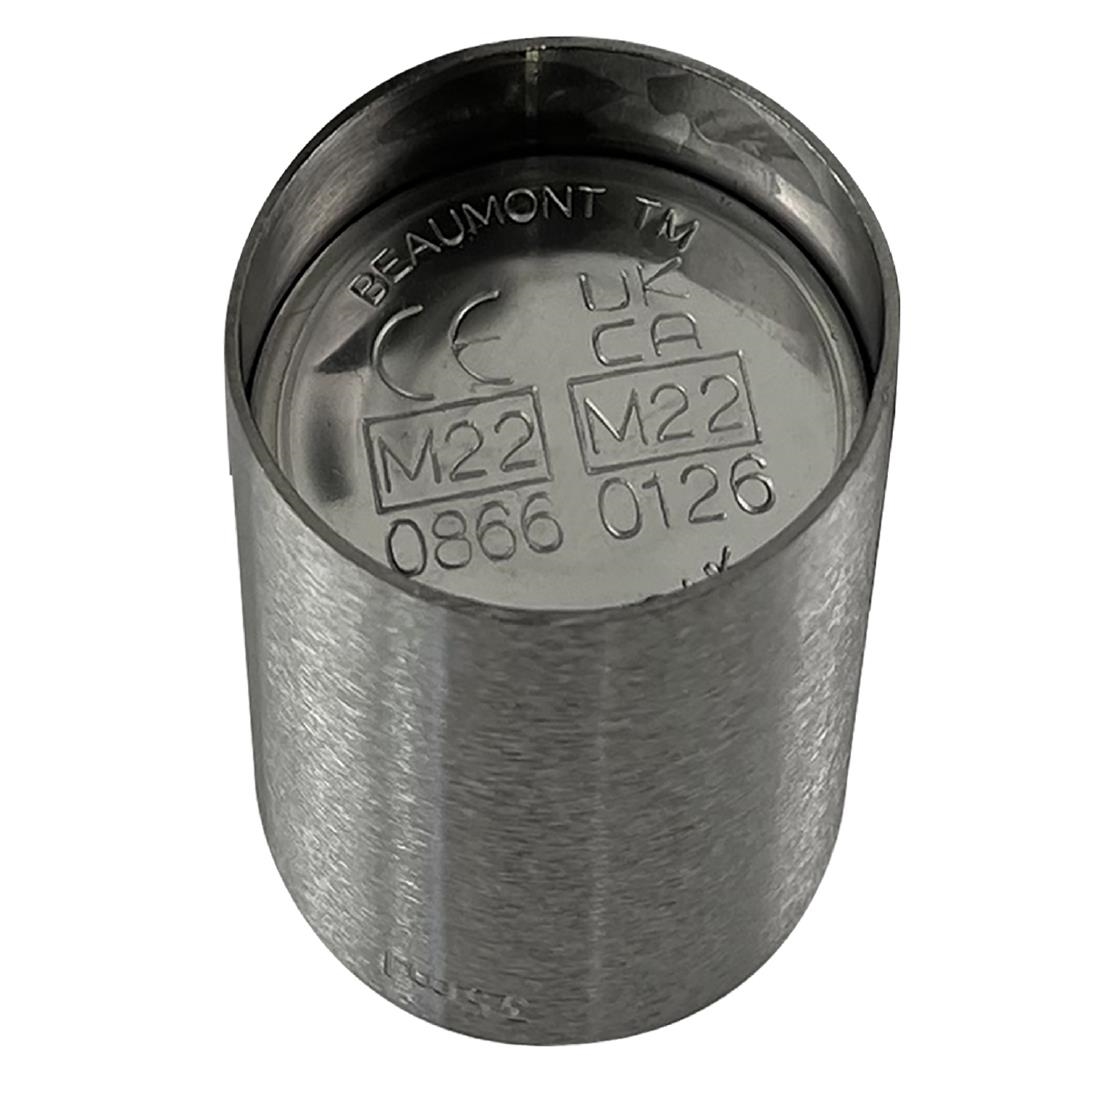 Beaumont Stainless Steel Thimble Measure CE Marked 200ml (CJ447)